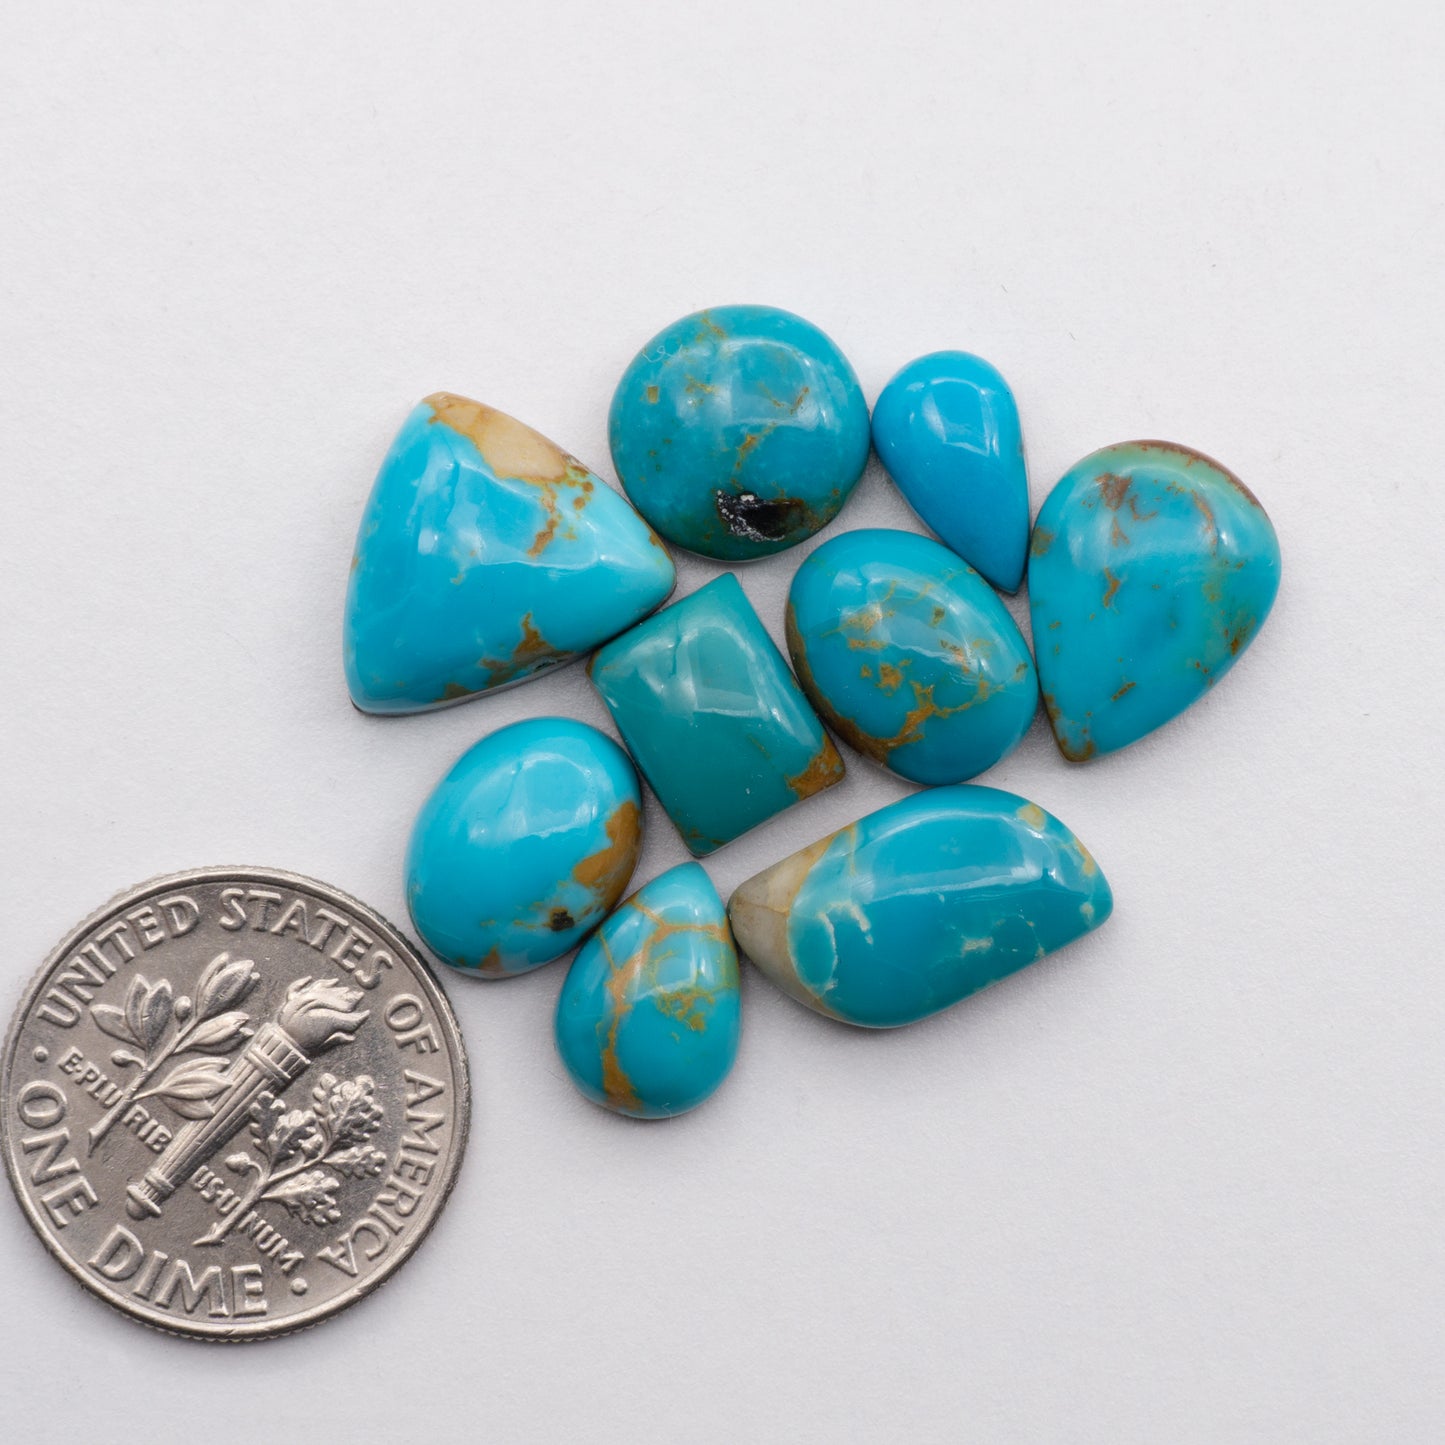 Kings Manassa is mined by Greg Cordova the owner and lapidary at Cutting Edge Turquoise